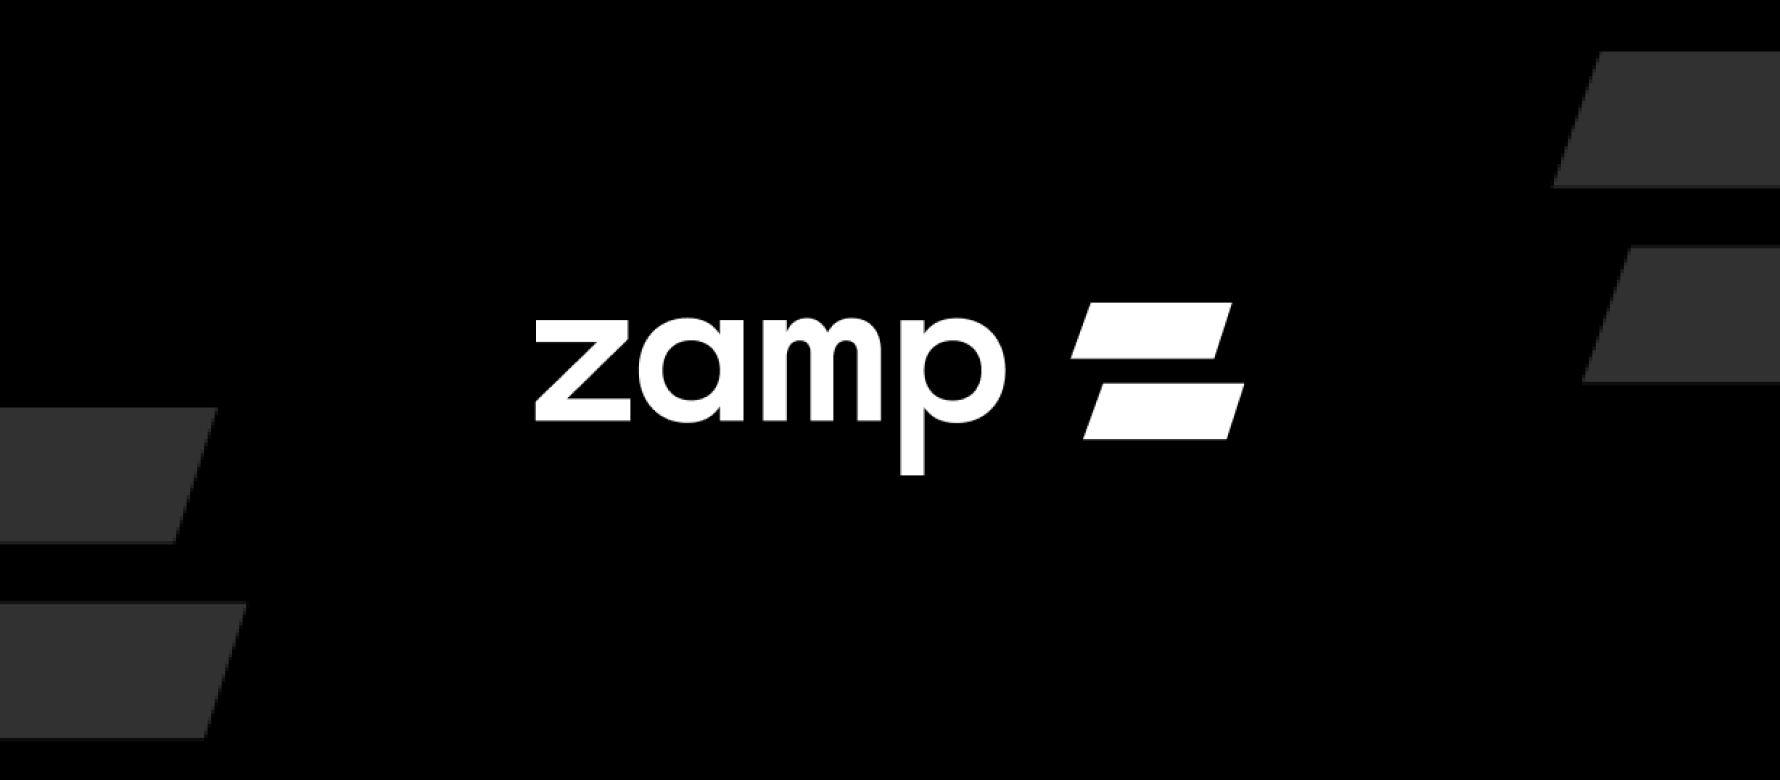 Case Study | Dashboard screen design of Zamp, a global FinTech B2B SaaS platform for payments, banking, and treasury.